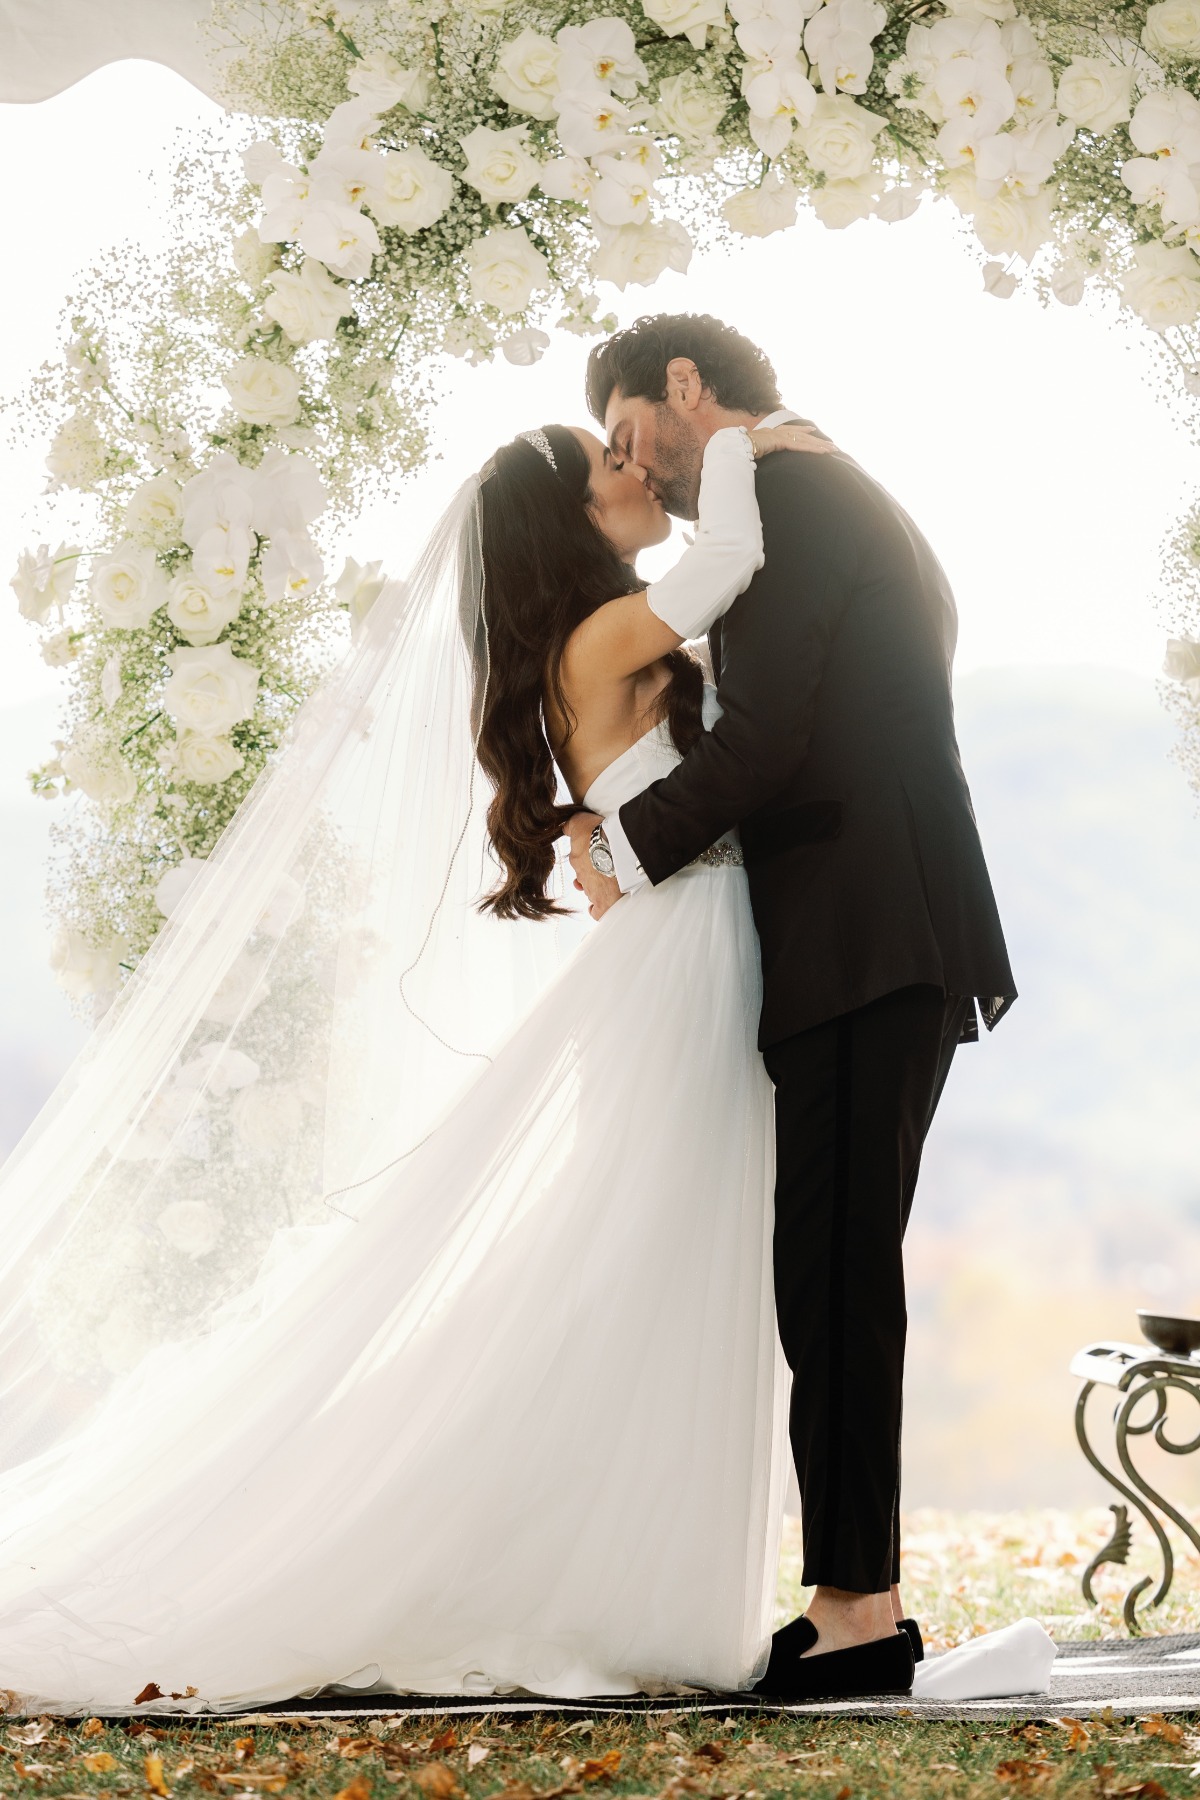 Romantic first kiss under white rose and baby's breath arch 